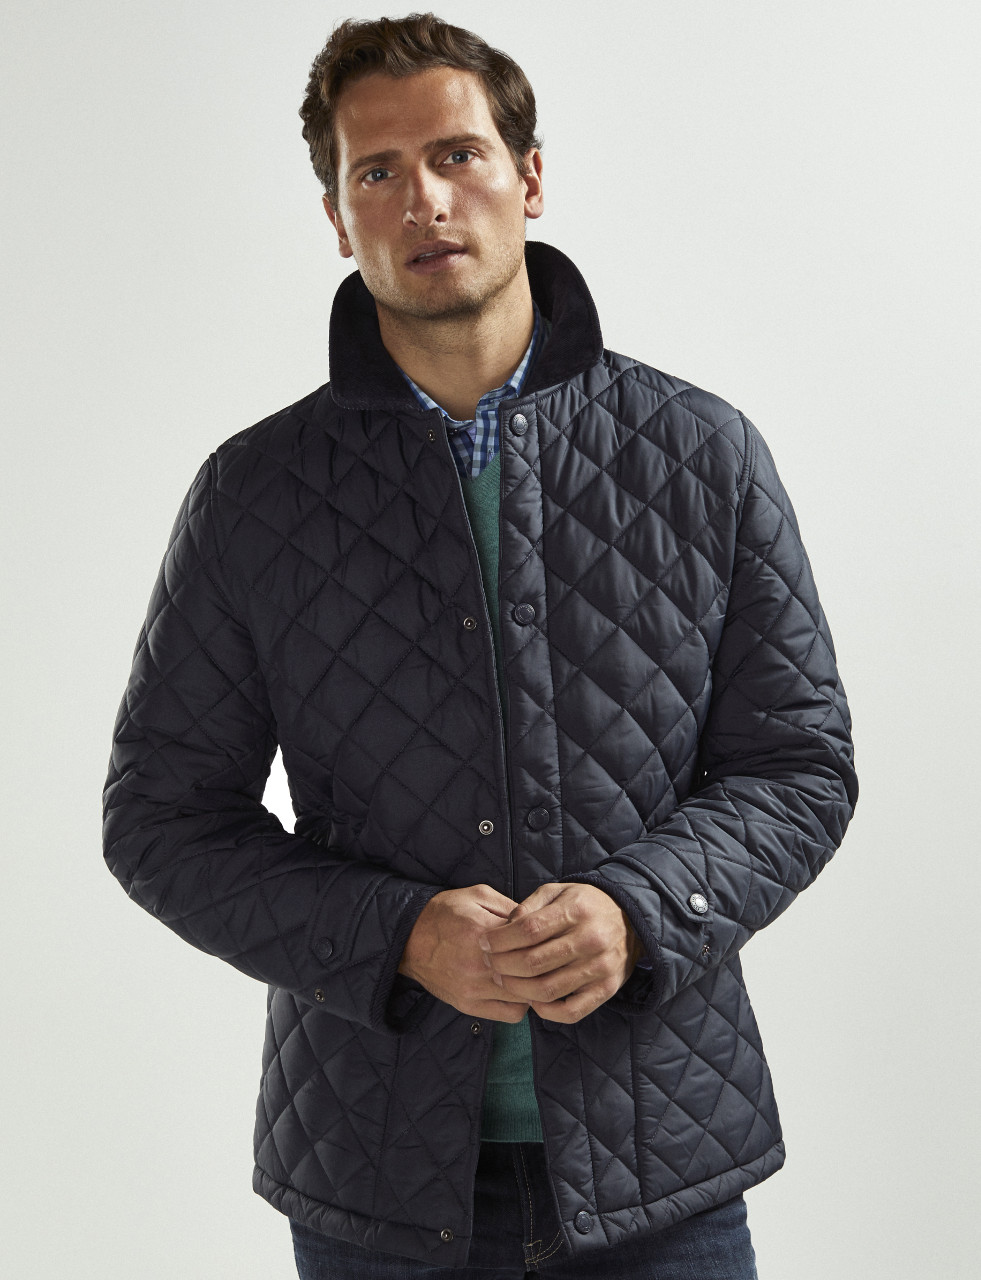 Men's Navy Blue Quilted Jacket - Bomber Style